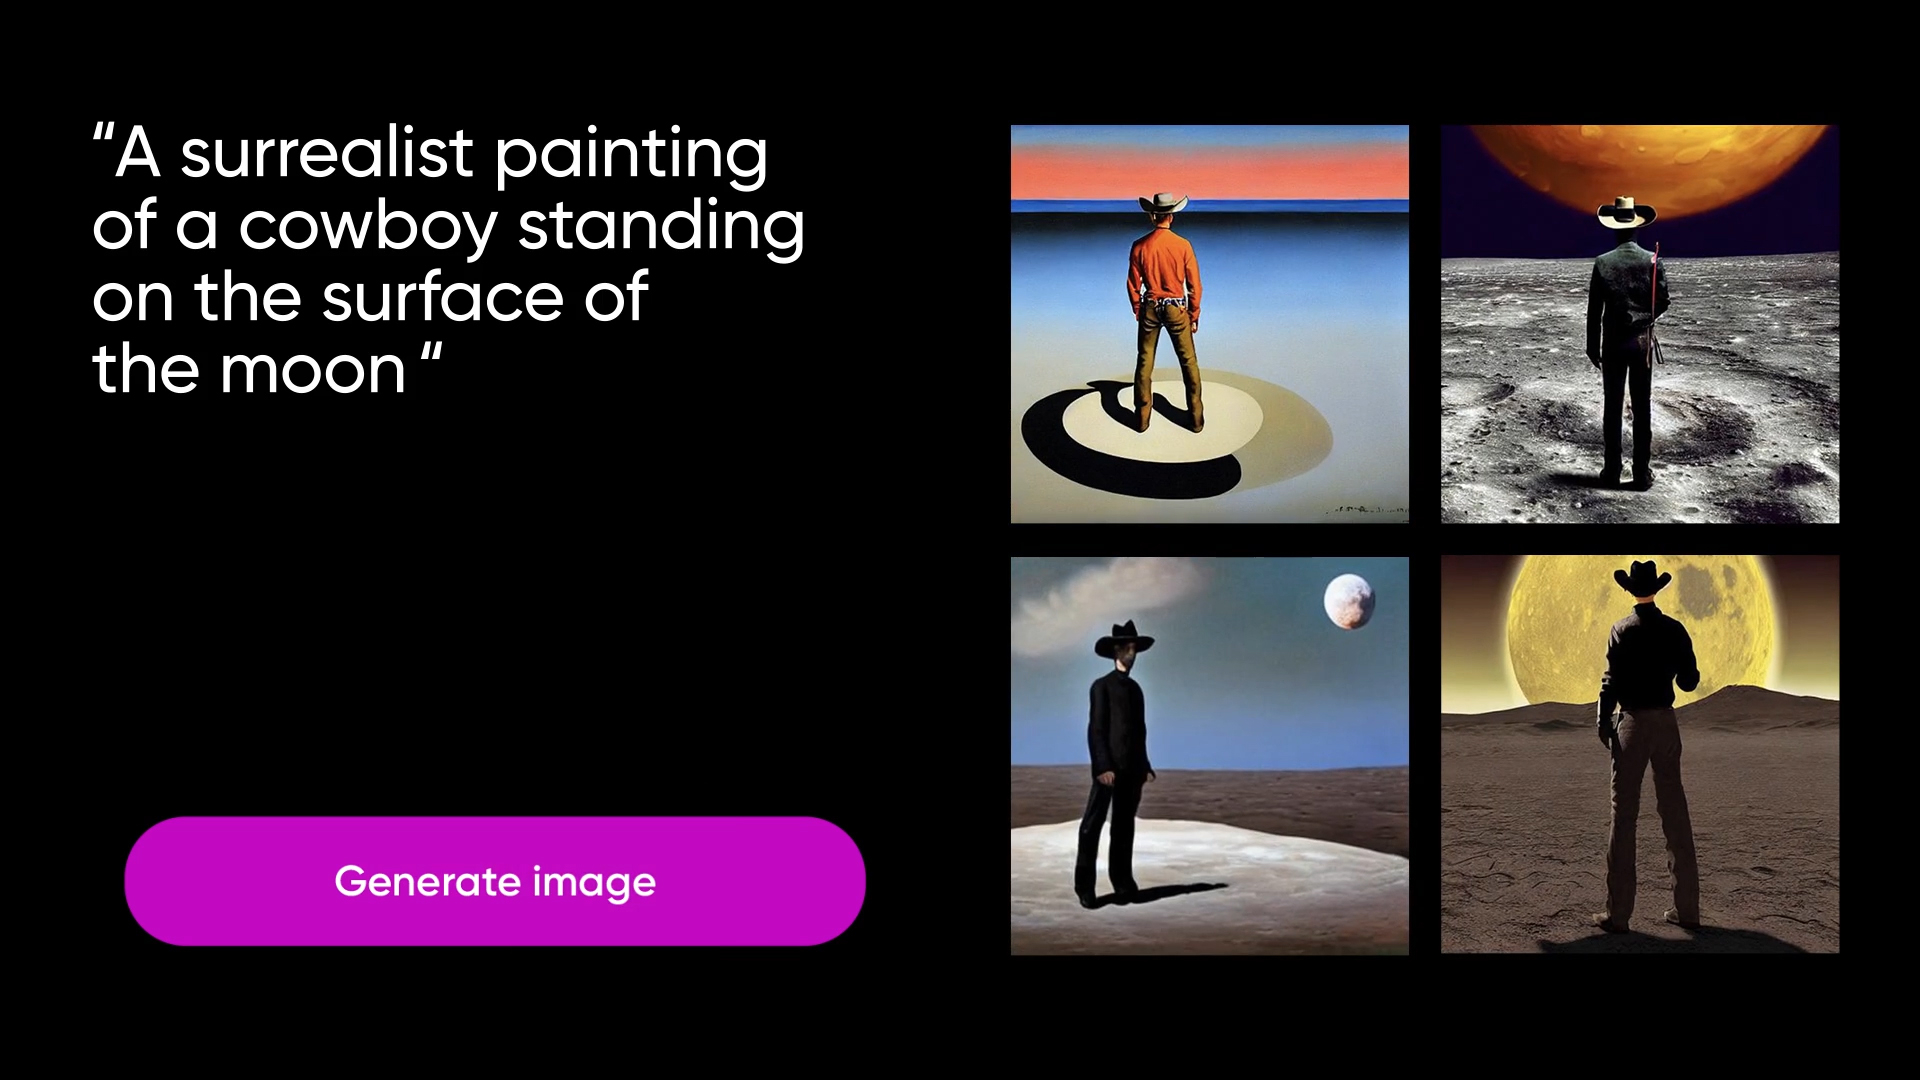 Spark Your Creativity with Picsart Ignite, a Suite of AI Design Tools for  Marketers to Meme Makers - Picsart Blog